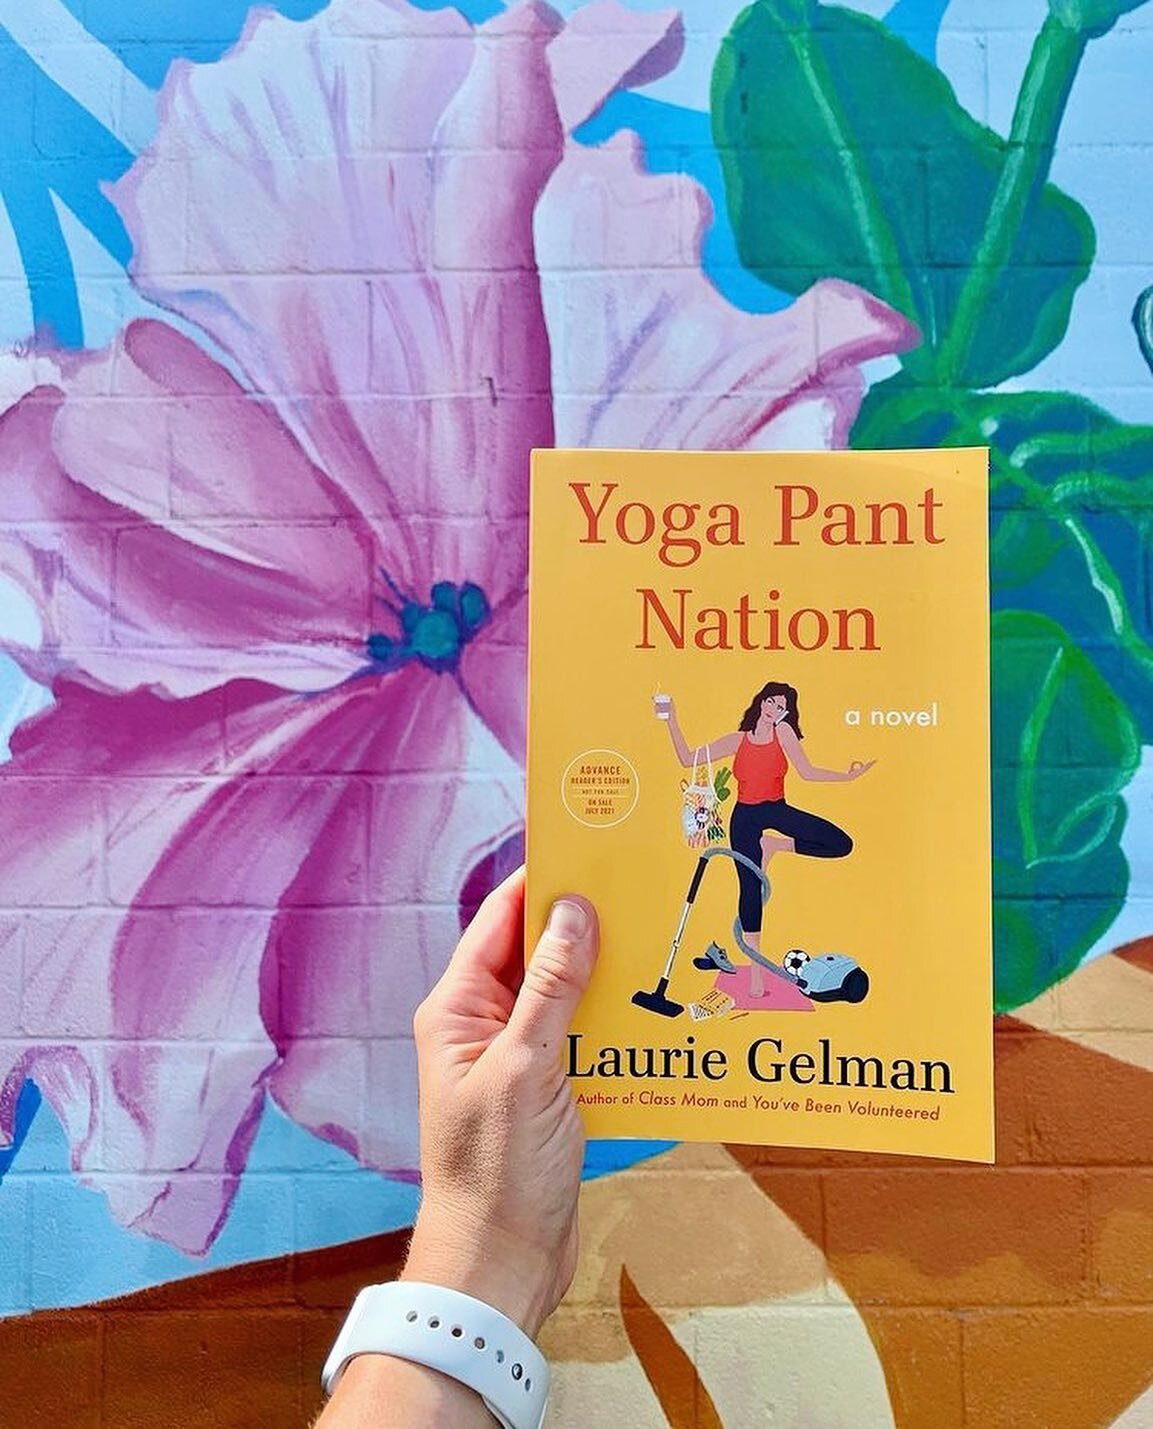 🎉🎂A very happy publication day to YOGA PANT NATION by @lauriegelman! Featured in @goodmorningamerica&rsquo;s Books to Heat Up Your July, they called it &ldquo;guiltily entertaining.&rdquo; It&rsquo;s the perfect Summer read ☀️ 

🧘&zwj;♀️Also thank